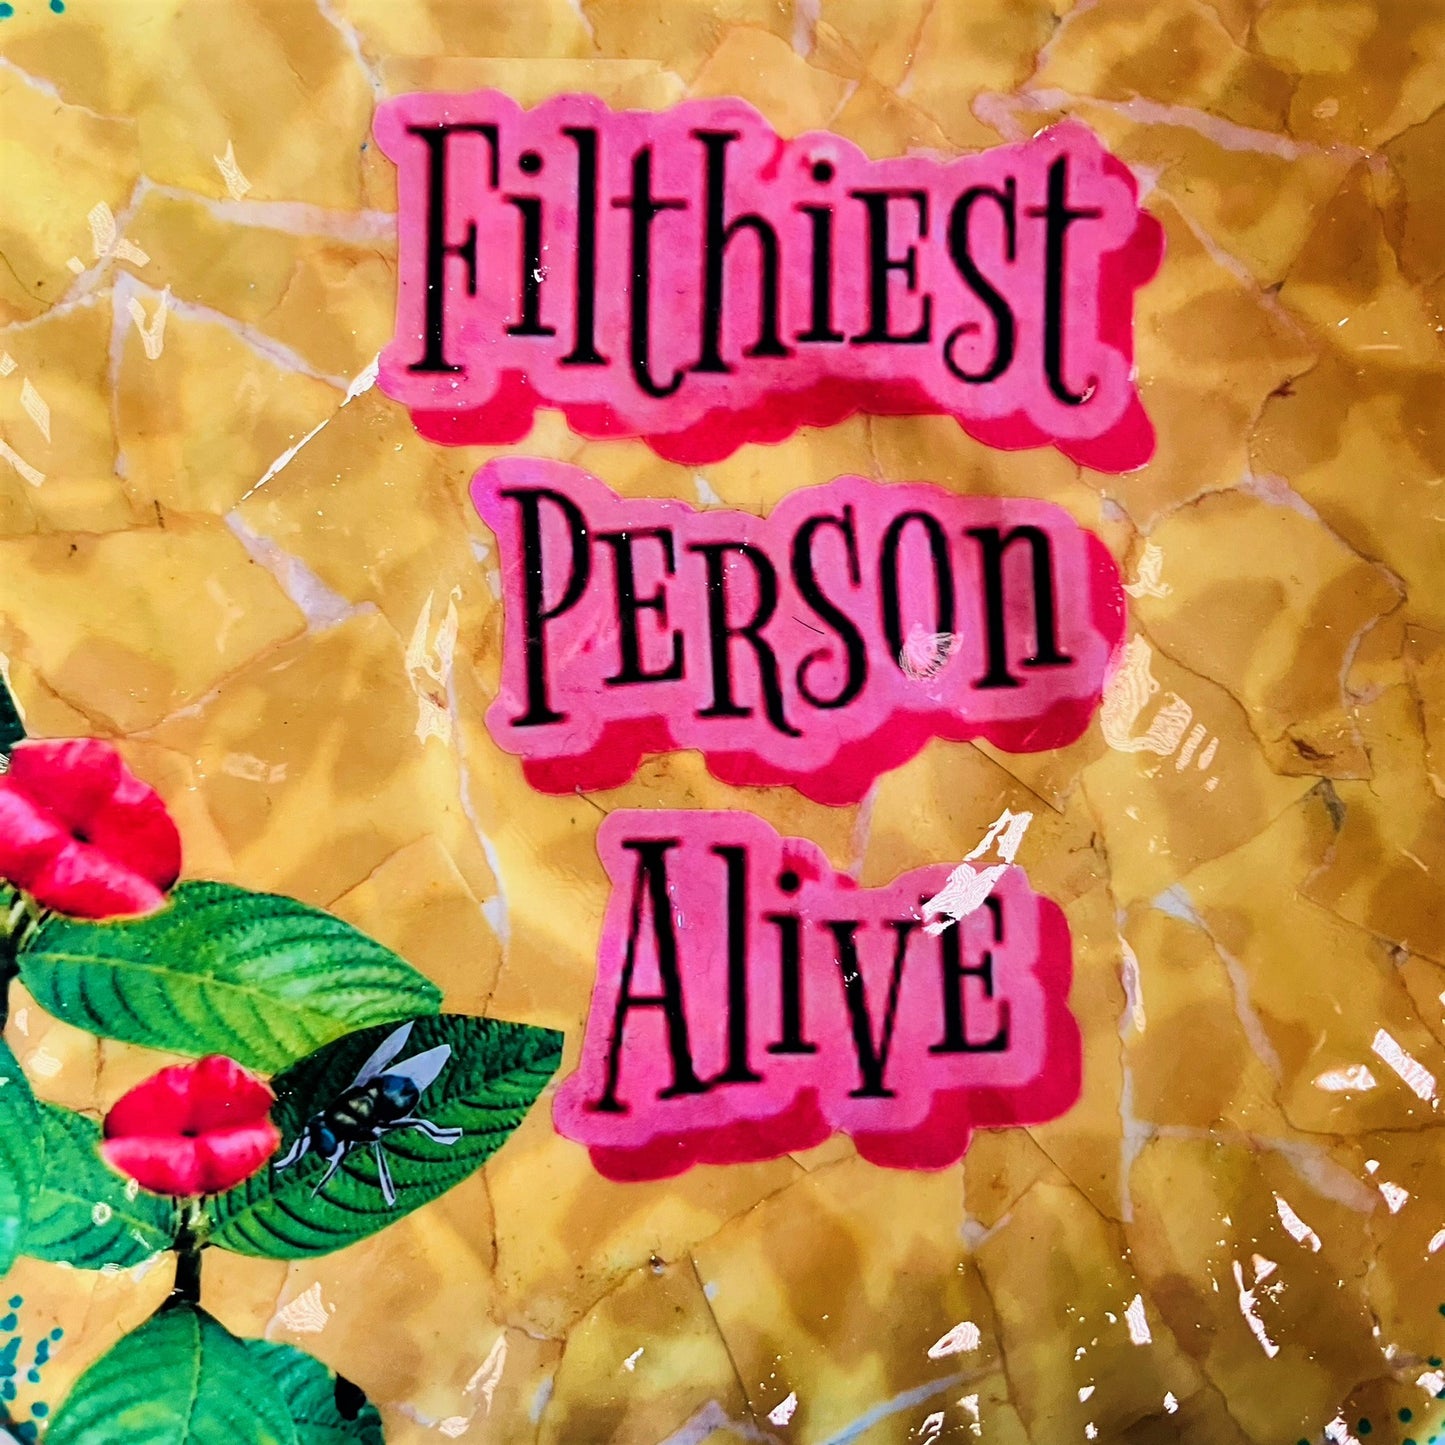 Yellow Upcycled Wall Plate - "Filthiest Person Alive" - by House of Frisson